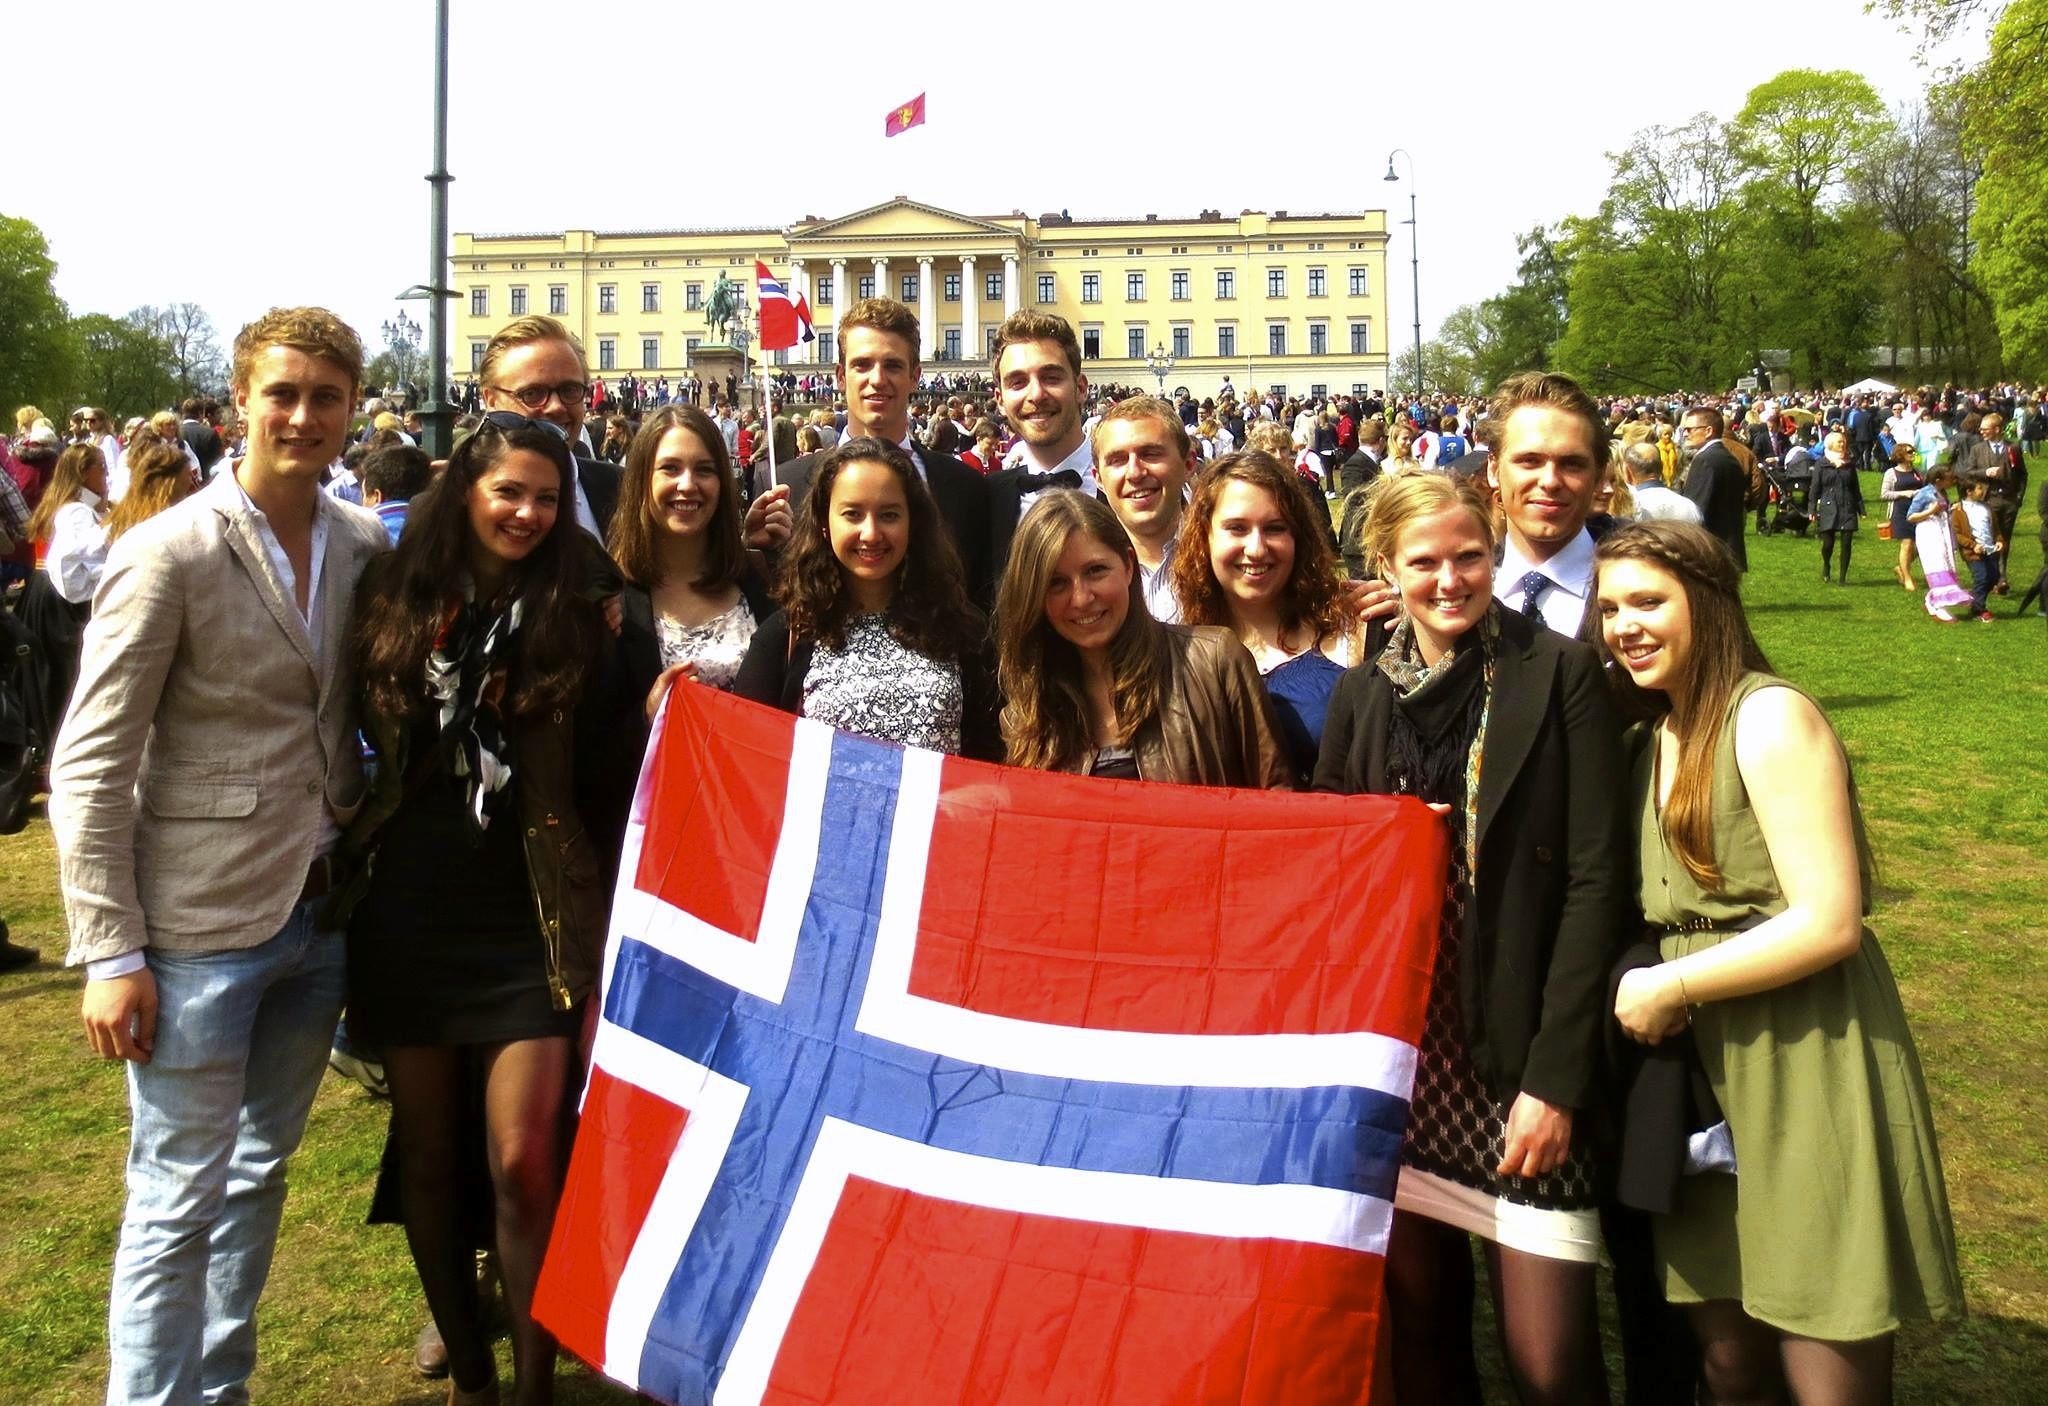 Doctoral Research Fellowship in Design History at University of Oslo in Norway, 2017